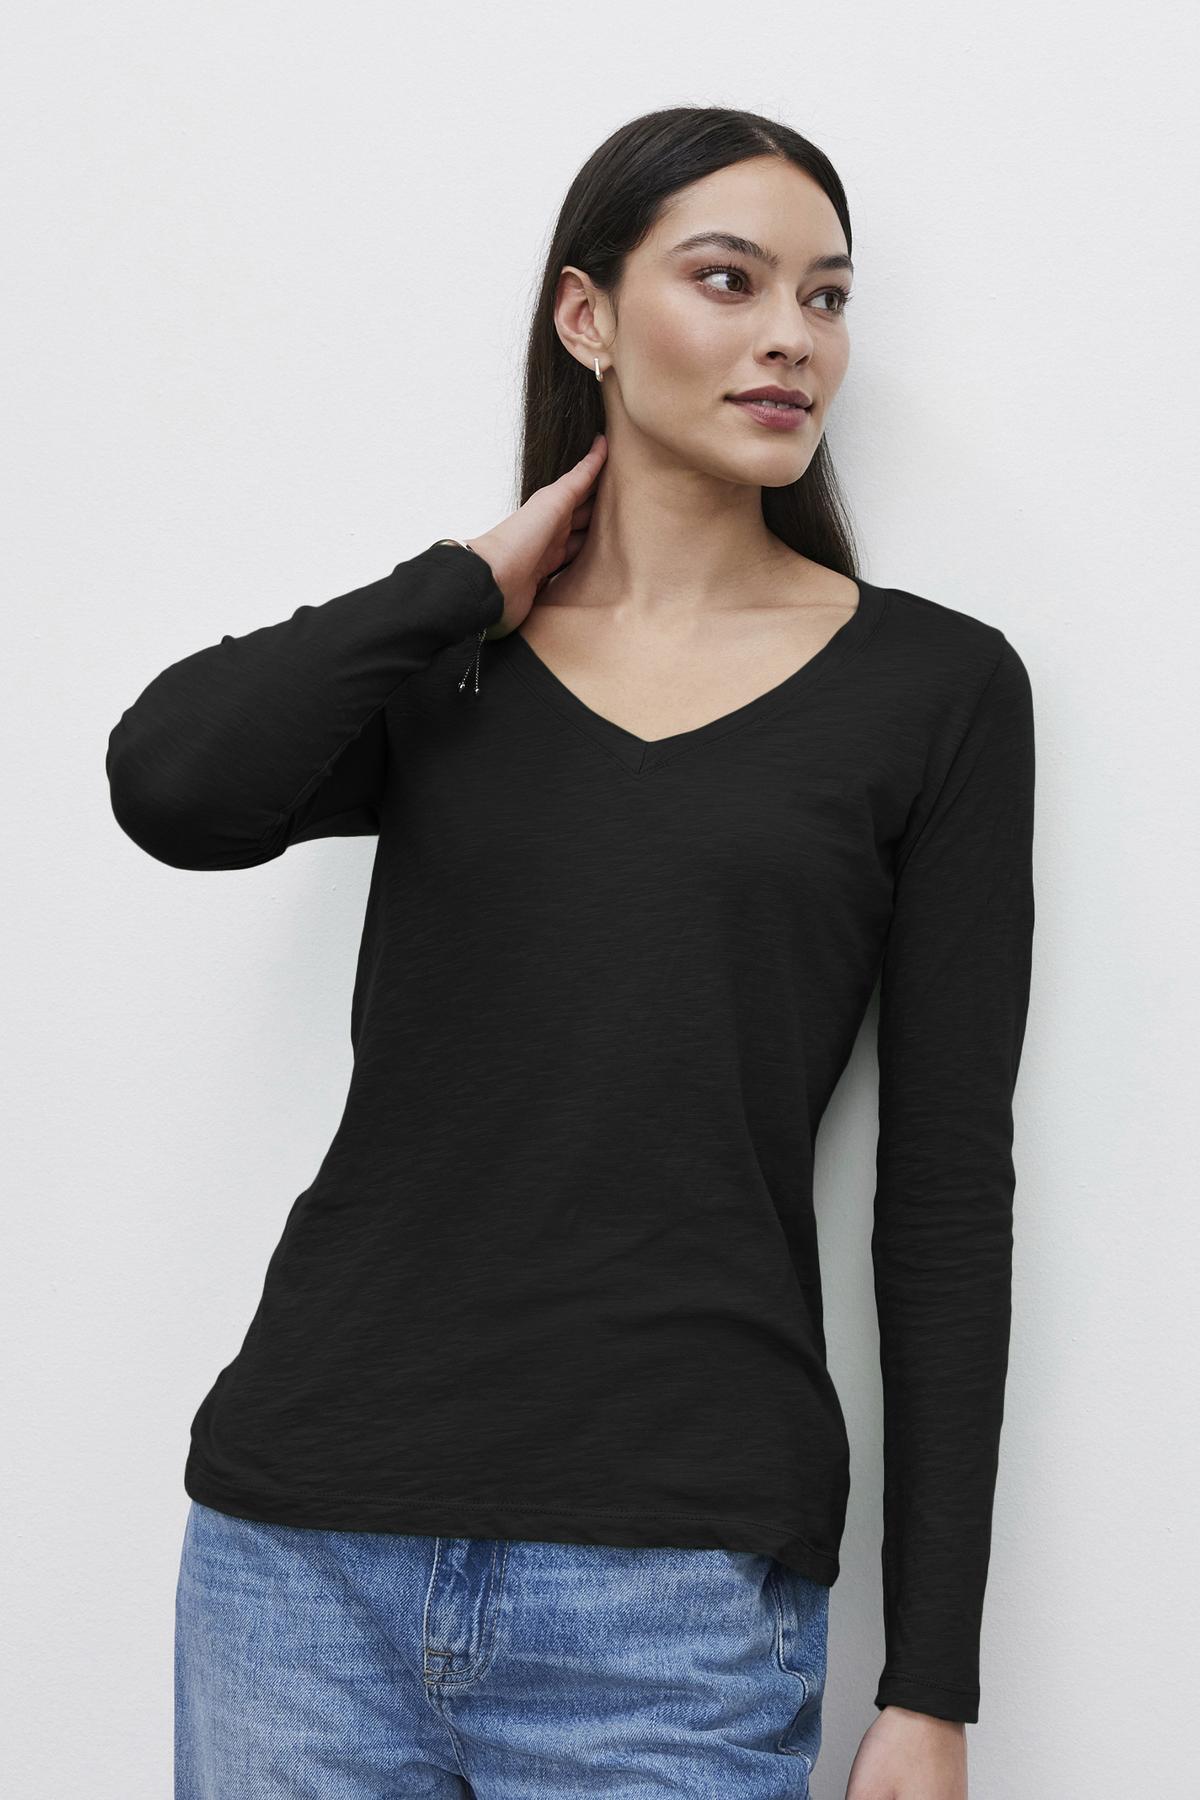   A person with long dark hair, wearing a black textured BLAIRE TEE by Velvet by Graham & Spencer and blue jeans, stands against a plain white background with one hand resting on their neck. 